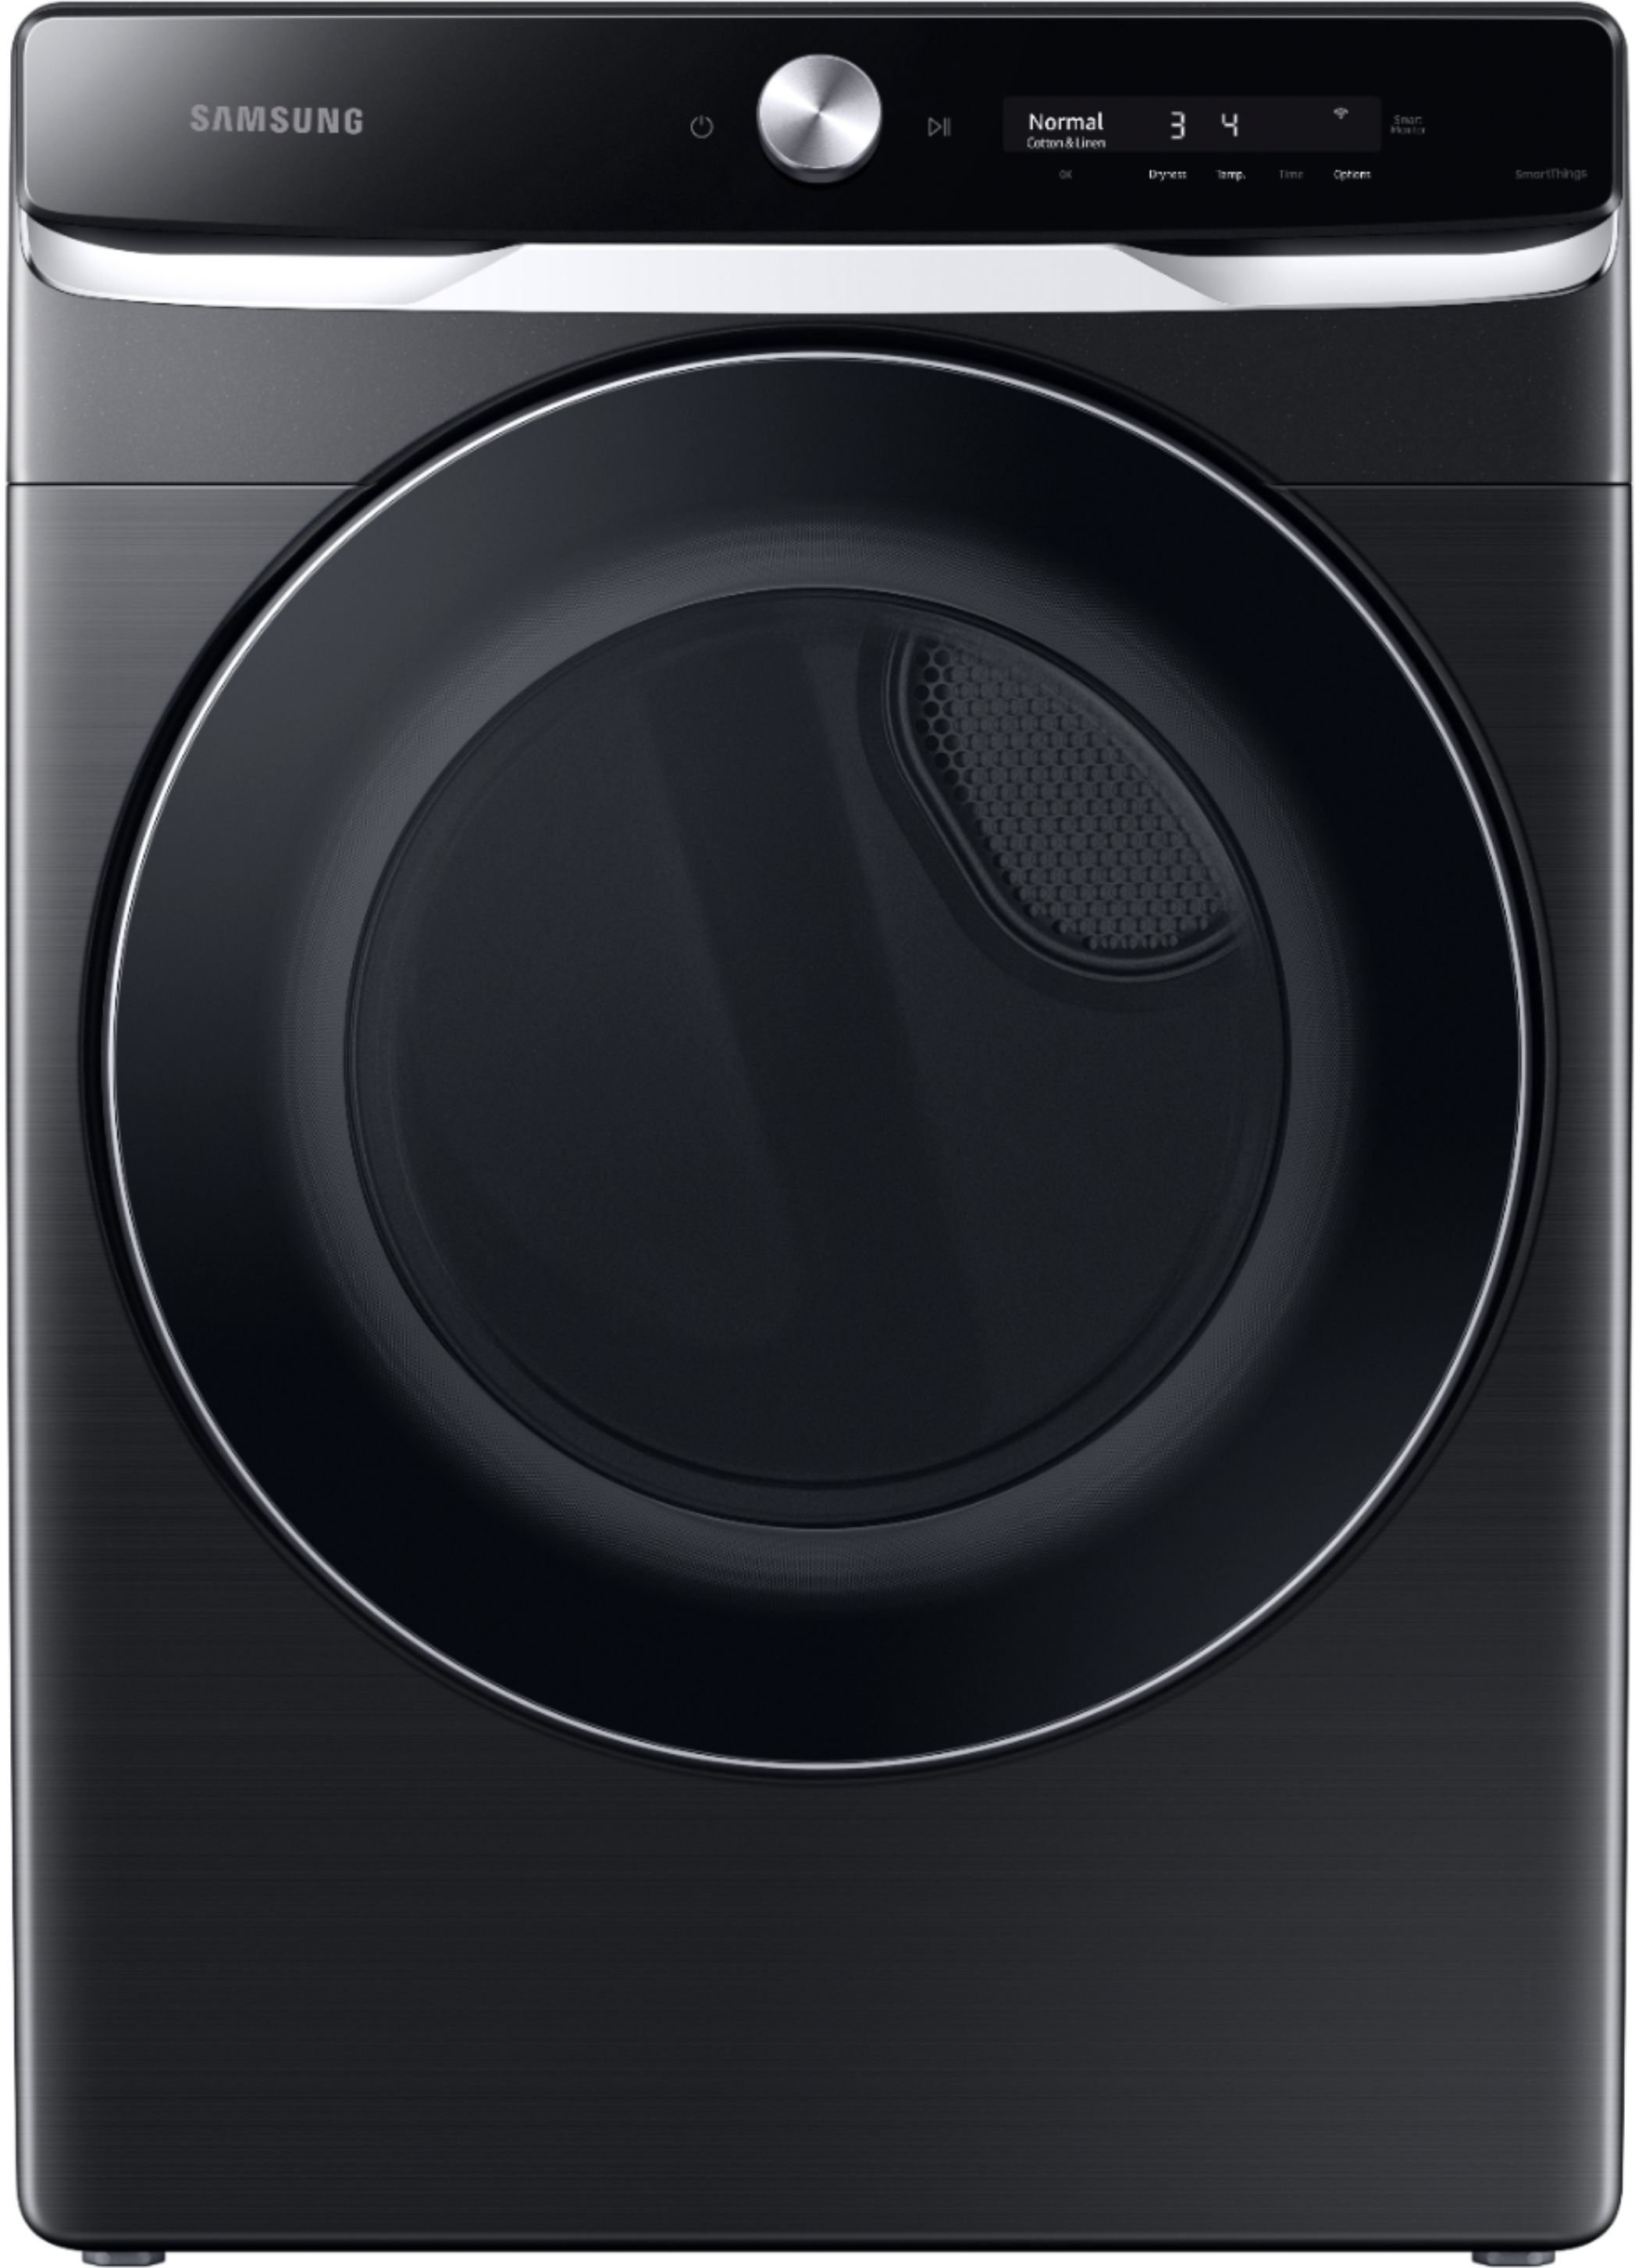 DVG50A8600V Samsung 7.5 cu. ft. Smart Dial Gas Dryer with Super Speed Dry  in Brushed Black BRUSHED BLACK - Hahn Appliance Warehouse